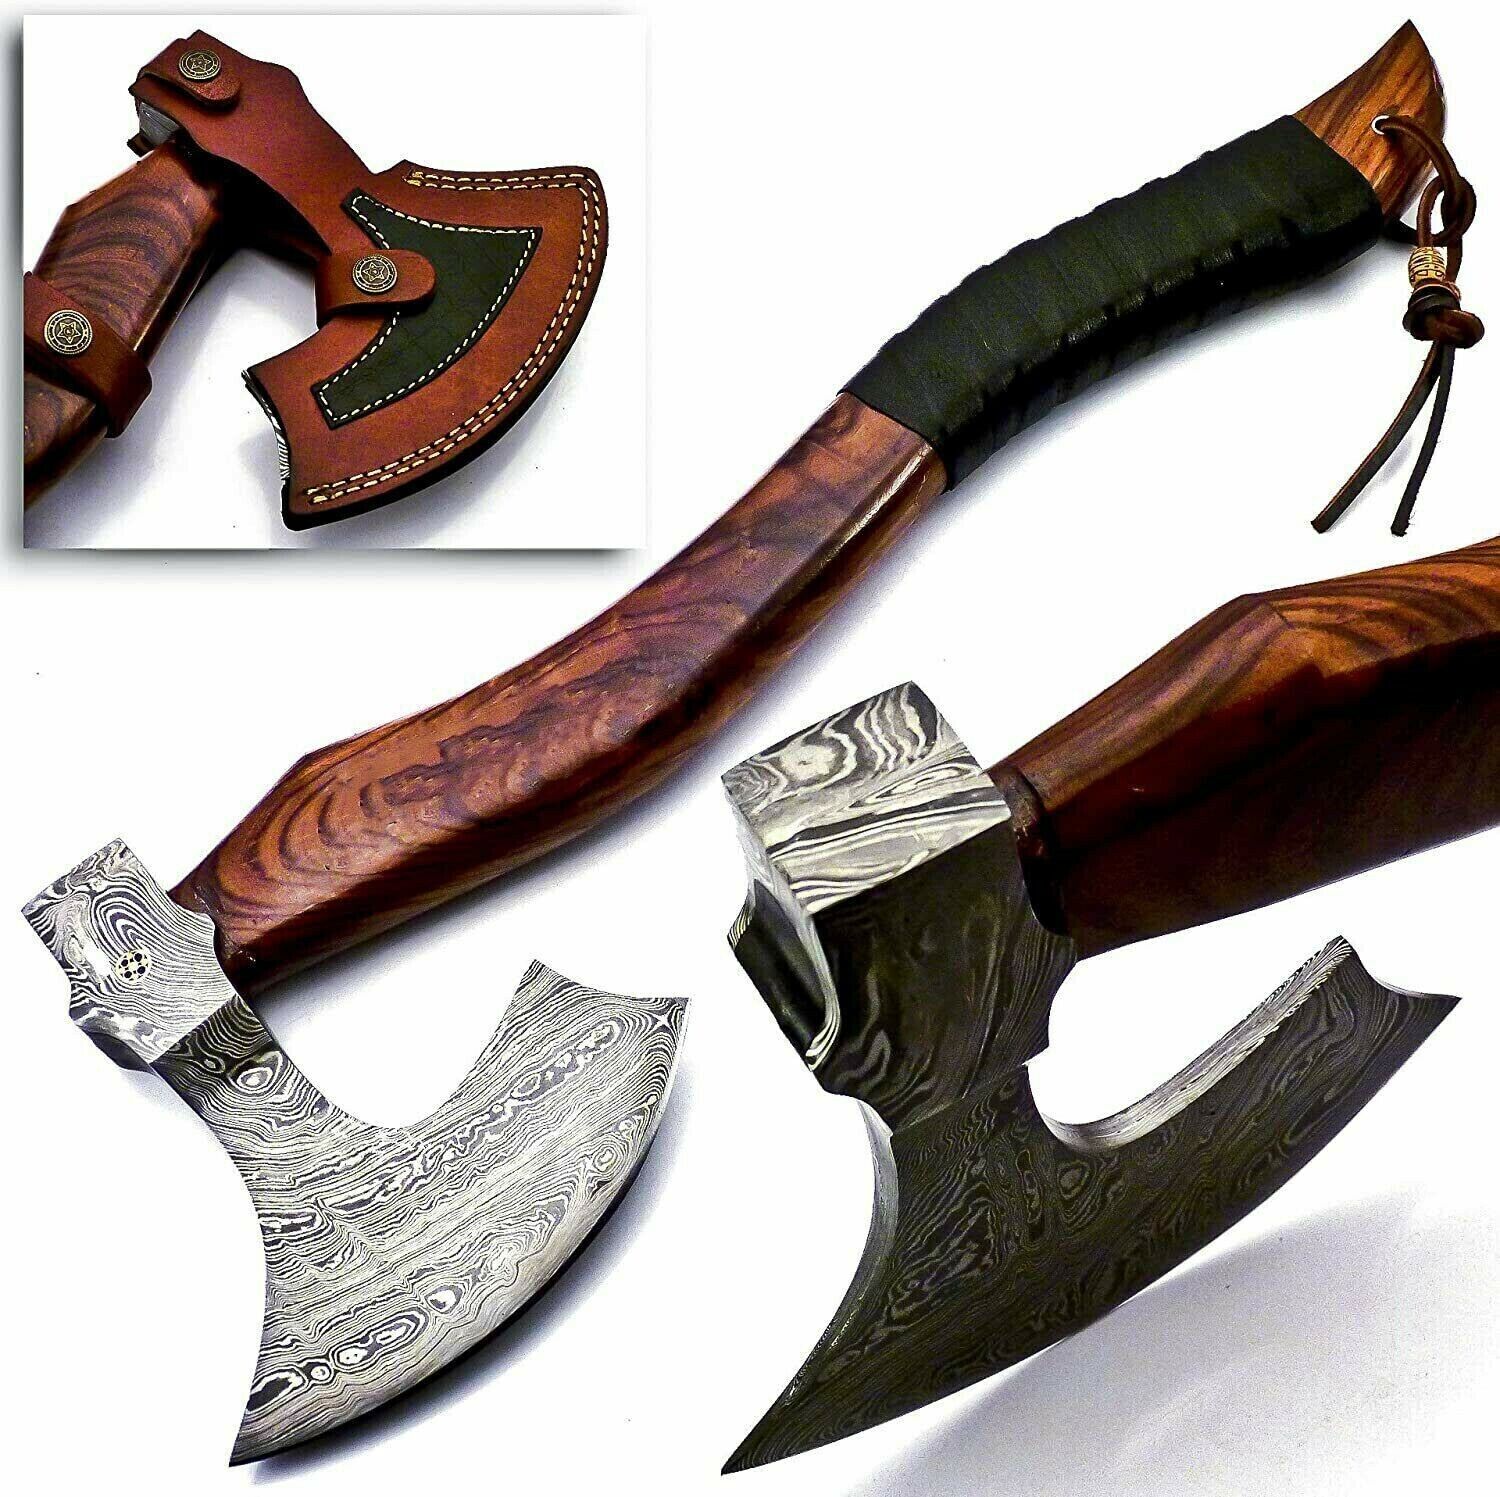  Damascus Steel Blade Axe Hatchet Tomahawk Hunting Knife Camping Outdoor.